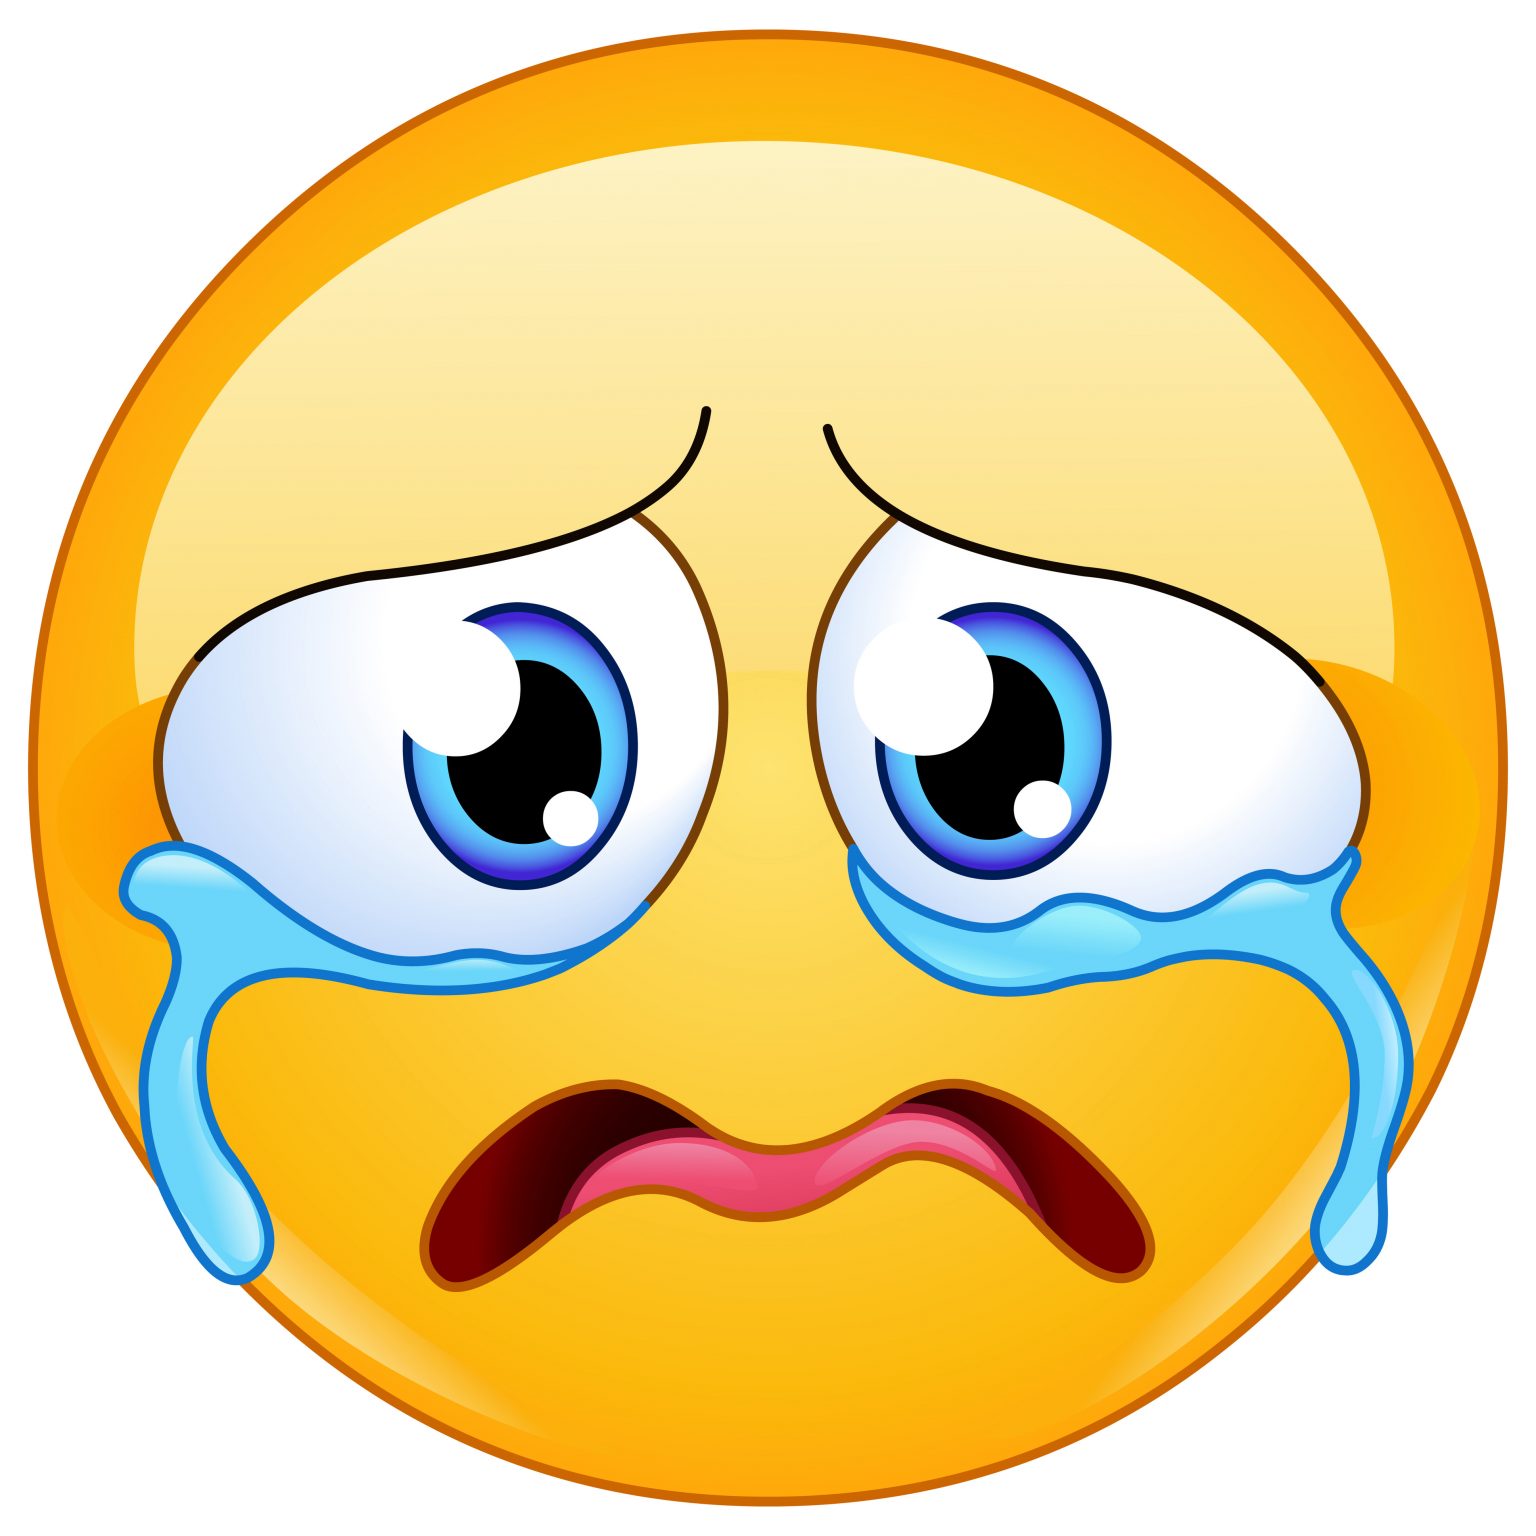 Crying Face Emoji Pictures - IMAGESEE